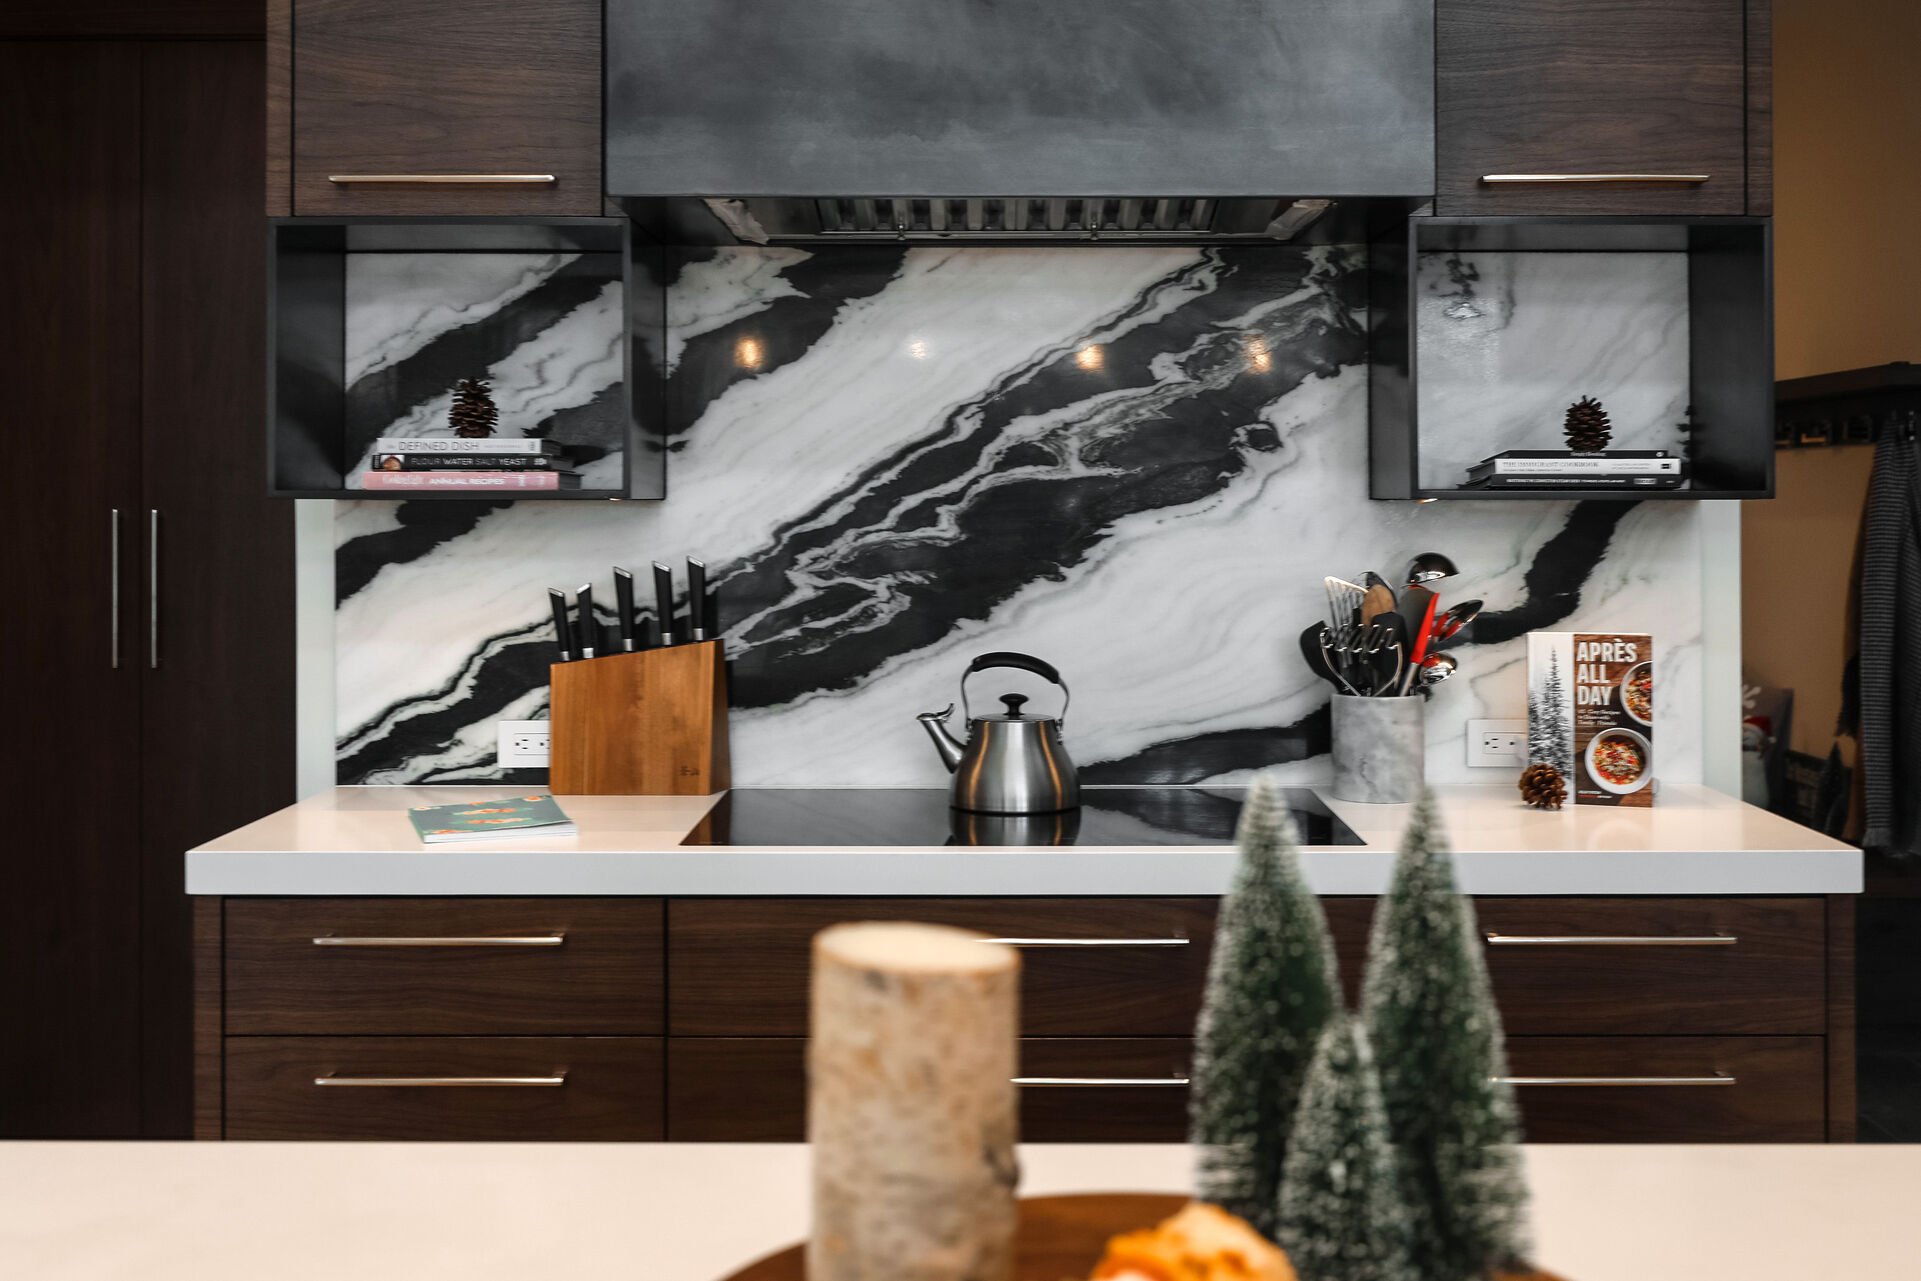 Open-layout, gourmet kitchen with gorgeous stone countertops,  double ovens, sub zero fridge, massive island with ample prep-space, and stunning marble backsplash